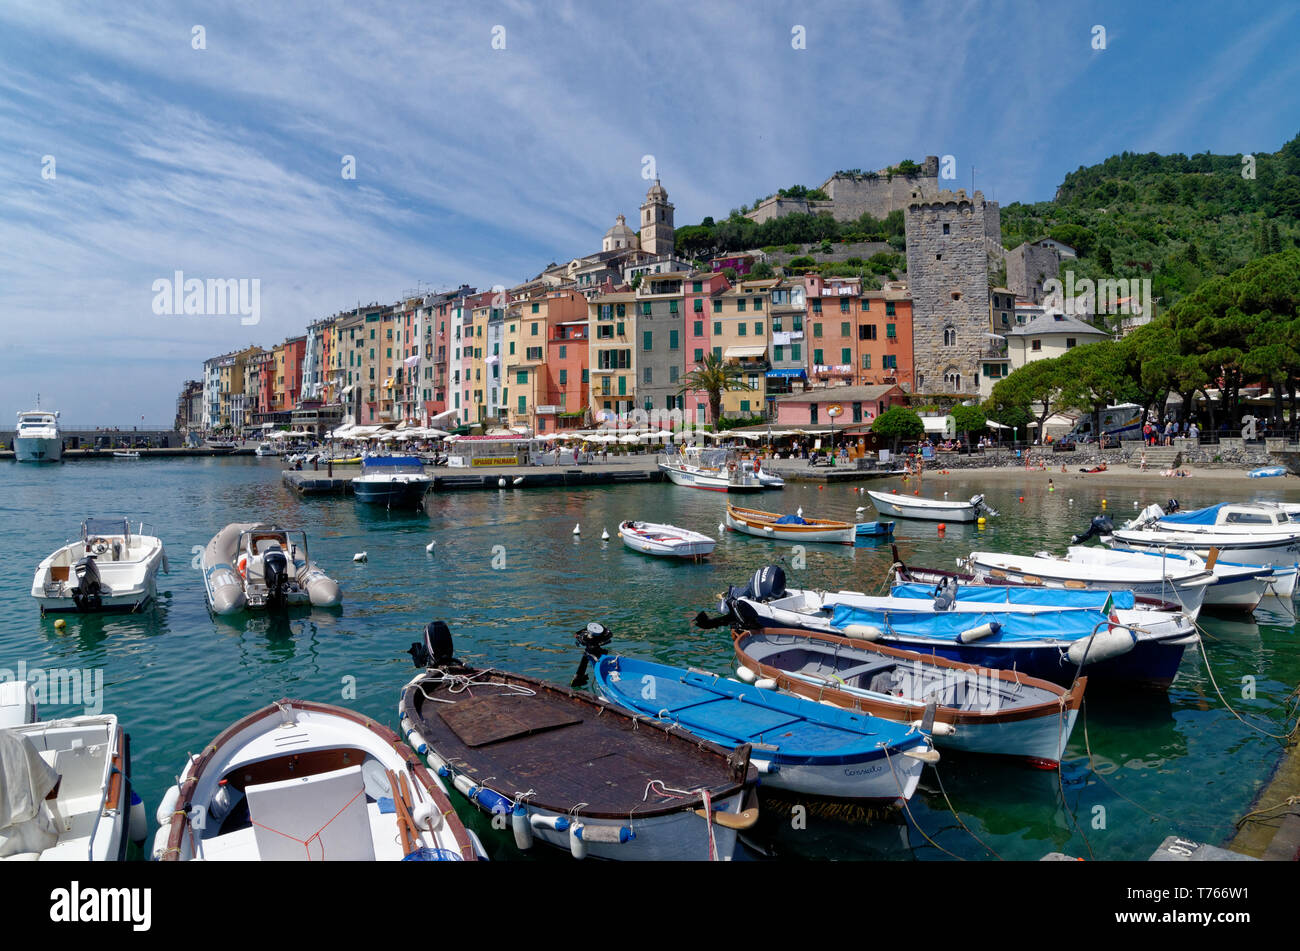 Looking across many small boats in the harbour at Porto Venere to colourful waterfront buildings, with Porta del Borgo and Doria Castle beyond Stock Photo